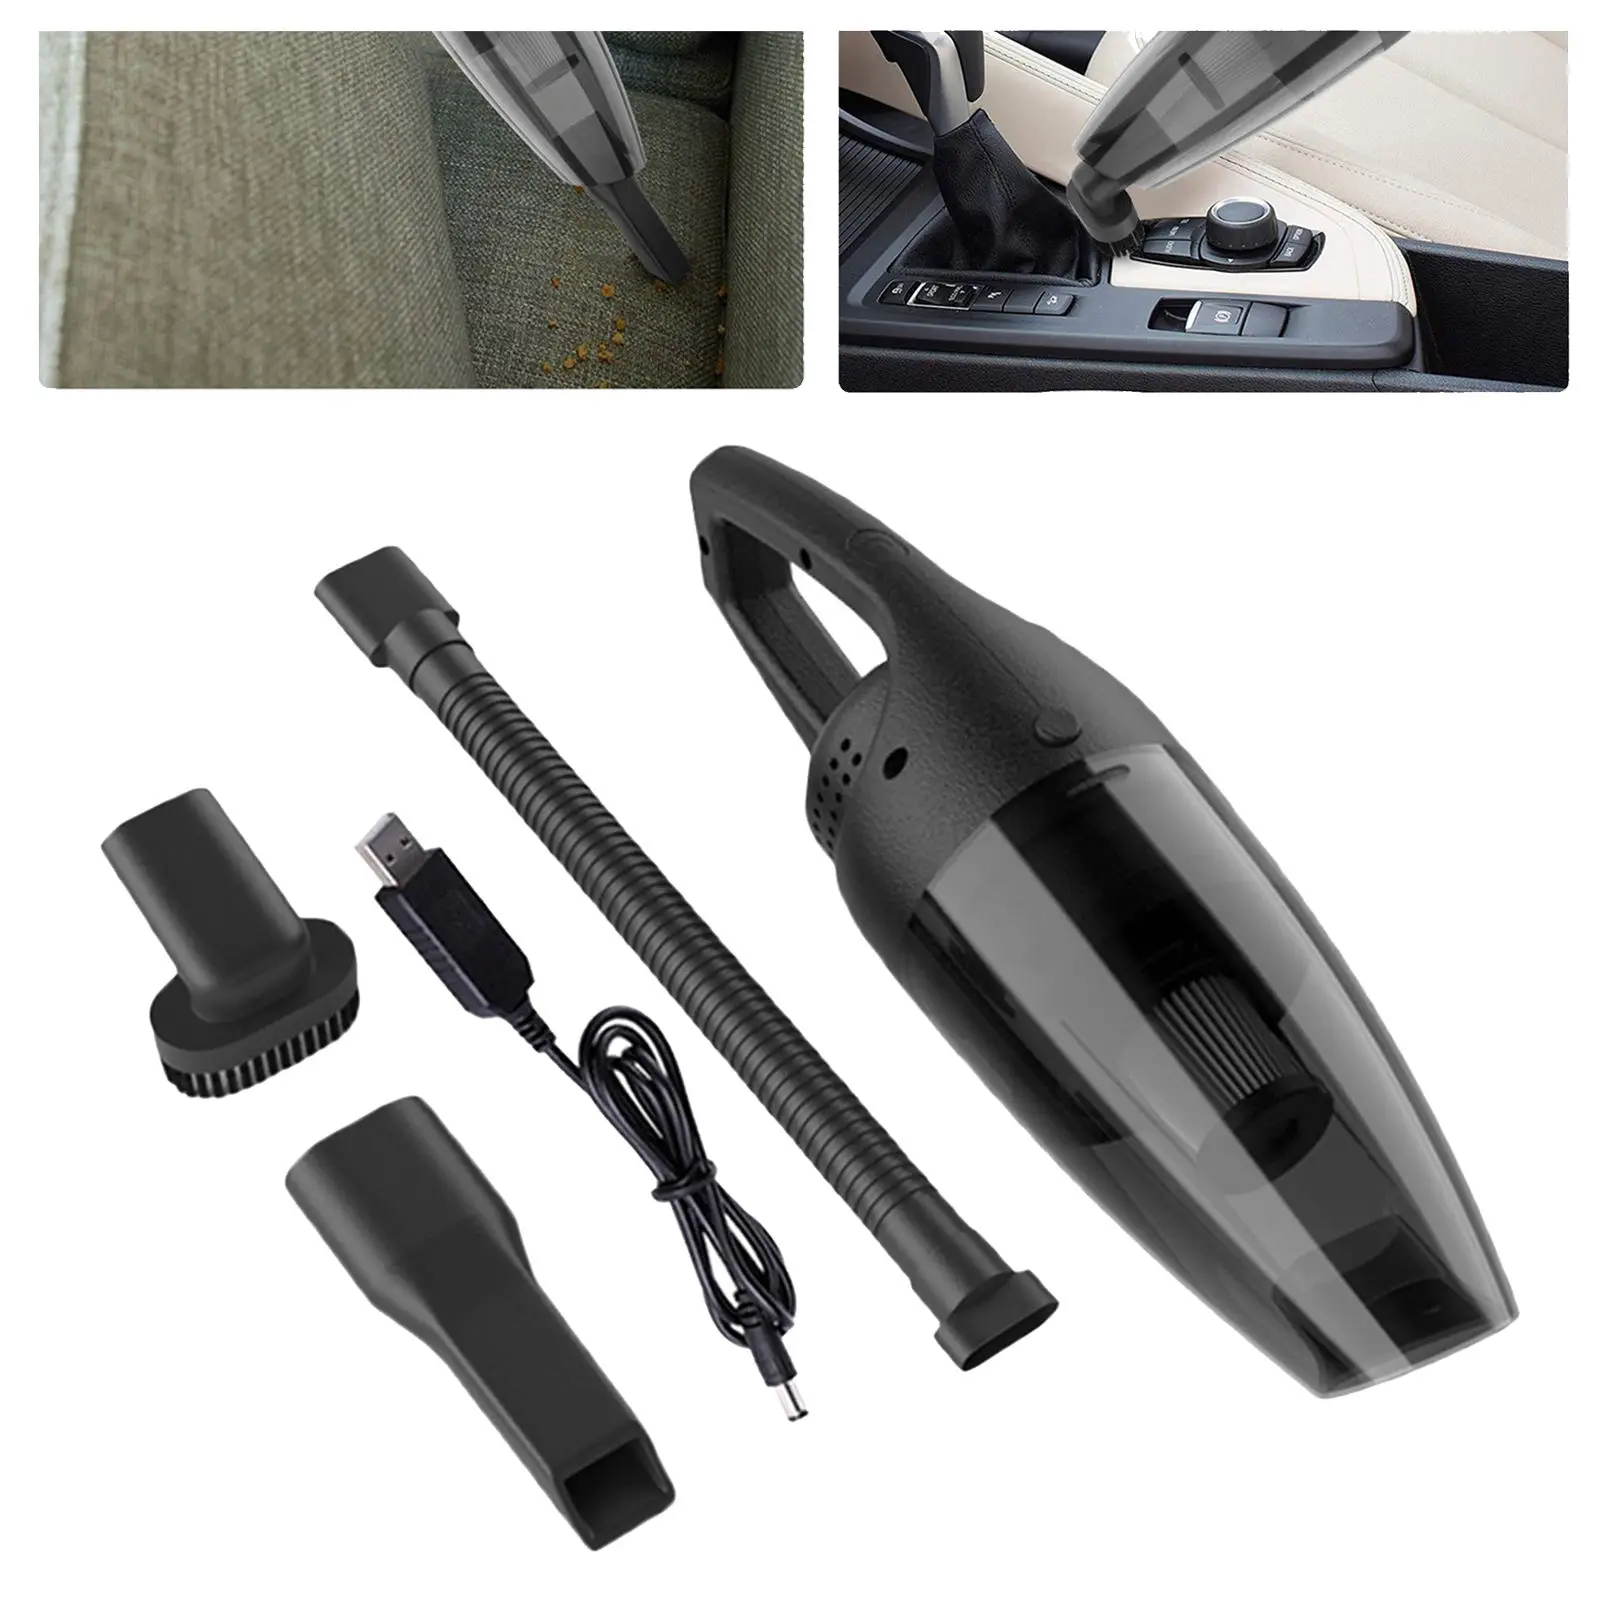 120W Car Vacuum Cleaner High Suction For Car Wet And Dry dual-use Vacuum Cleaner Handheld Mini Car Vacuum Cleaner